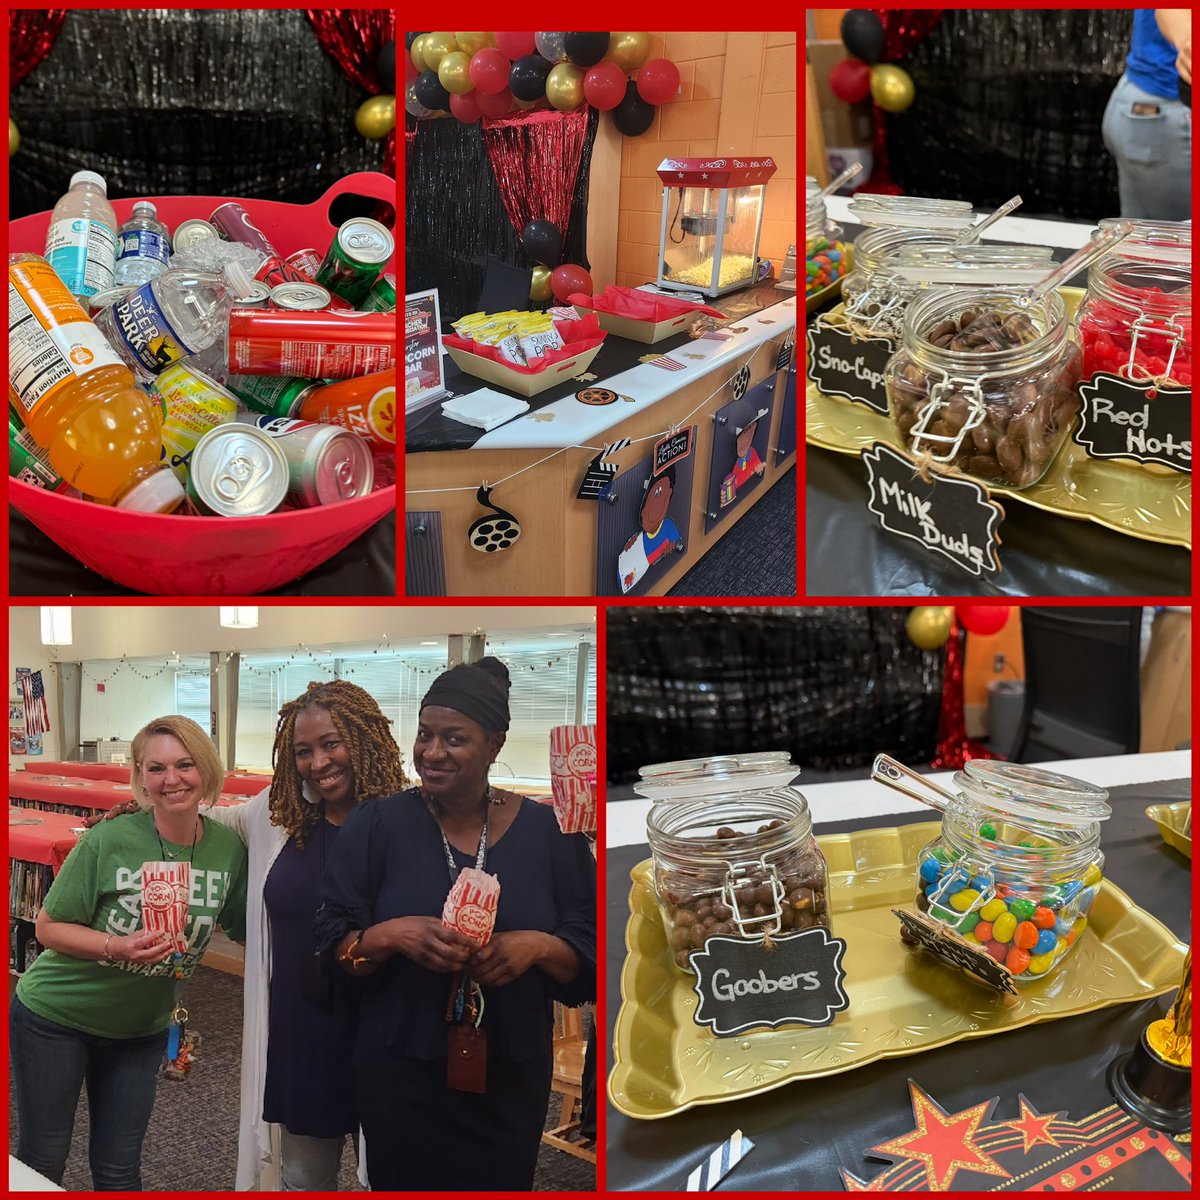 Today was Day 2 of #teacherappreciationweek! We’re Popping! Staff and teachers enjoyed a popcorn bar in the media center. Thank you to the @gwes_pta and parent volunteers for keeping the room stocked all day! 🍿🥤🎉@PGCPSTAG @TonyaW0621